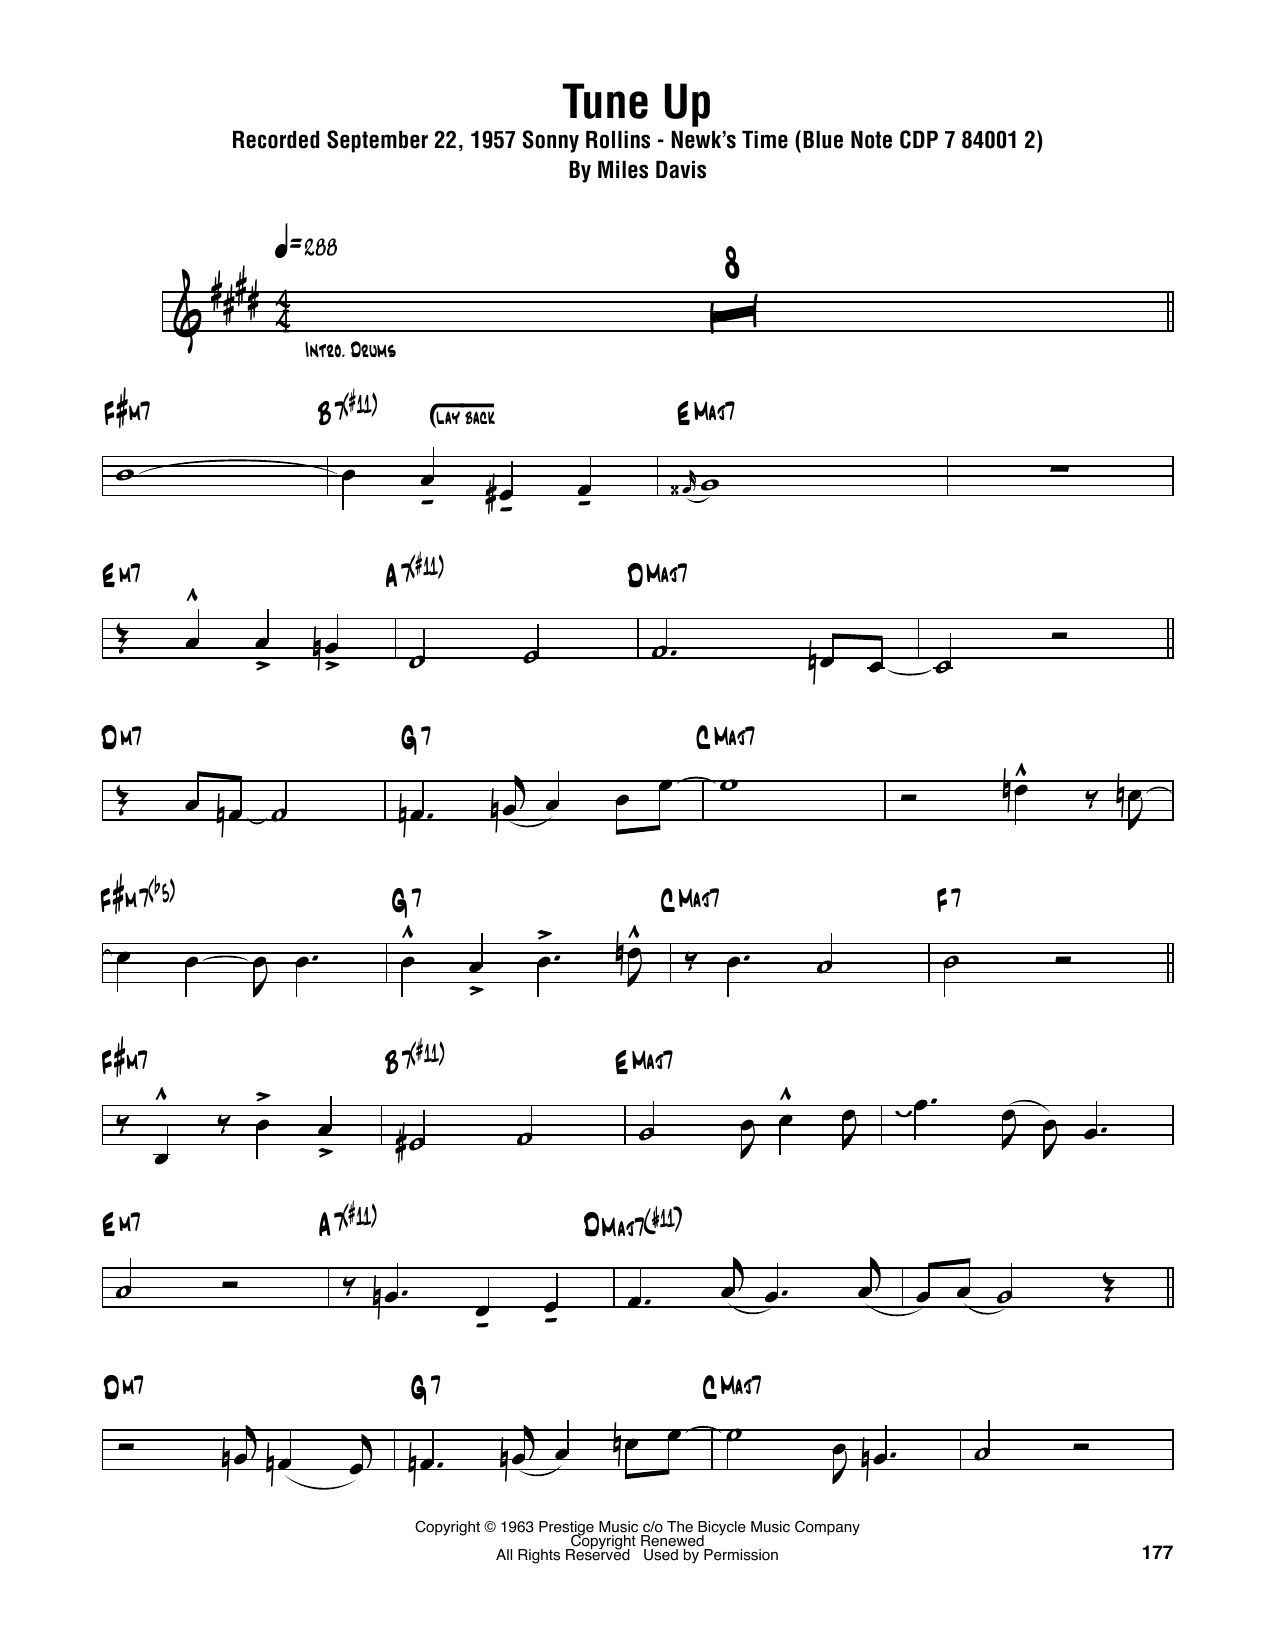 Download Sonny Rollins Tune Up Sheet Music